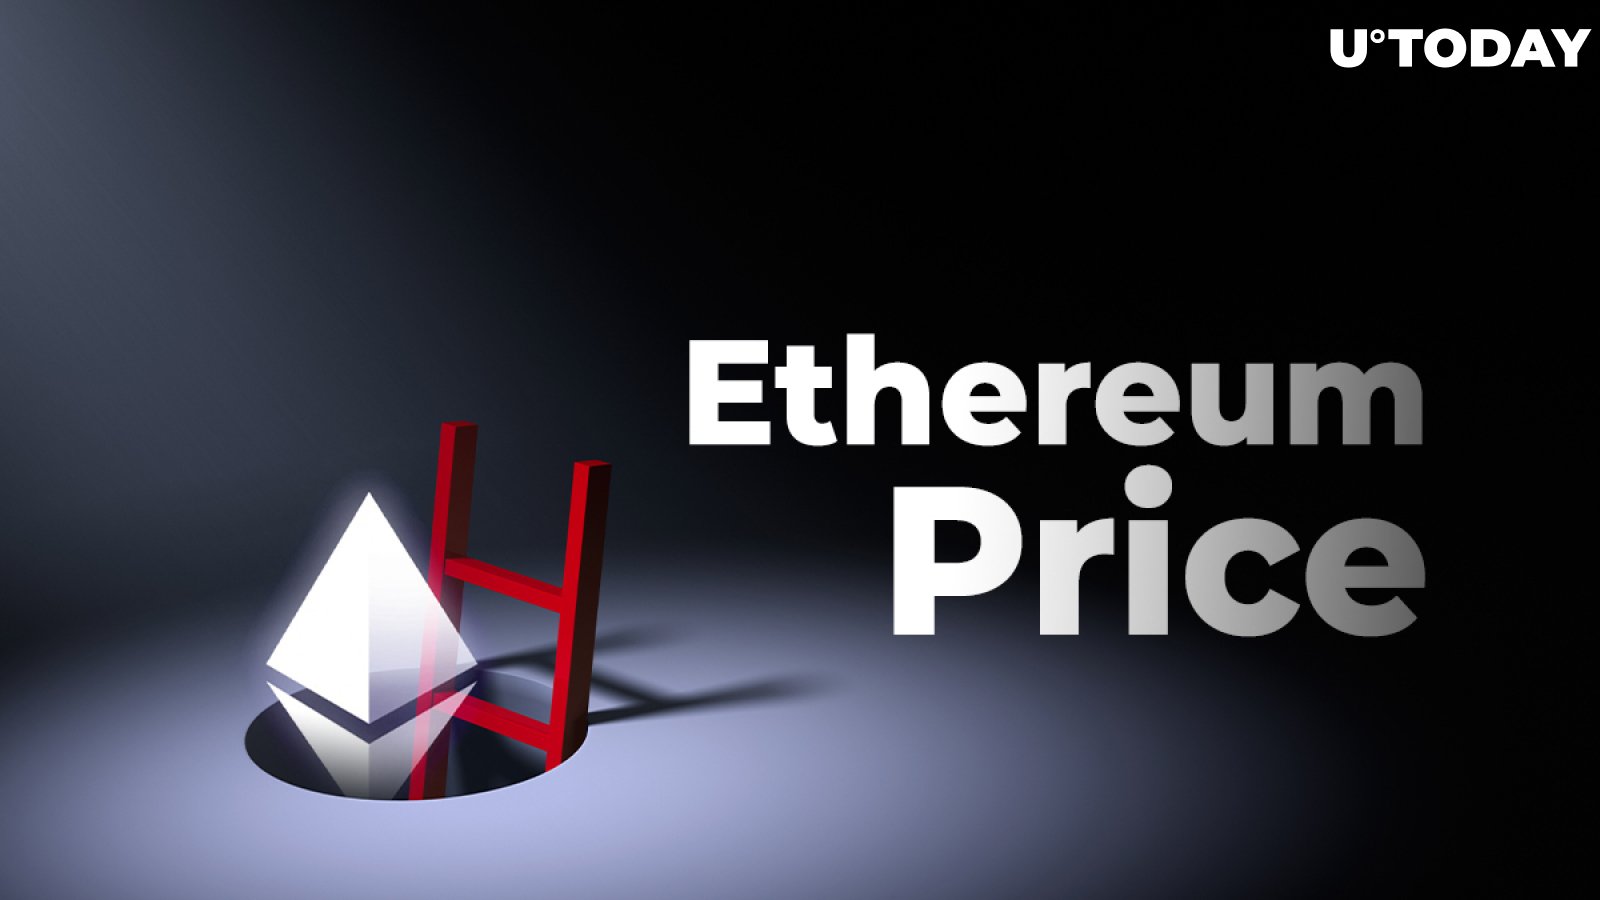 Ethereum (ETH) Price Likely to Rip Up Once It Breaks Above $306: Trader Josh Rager